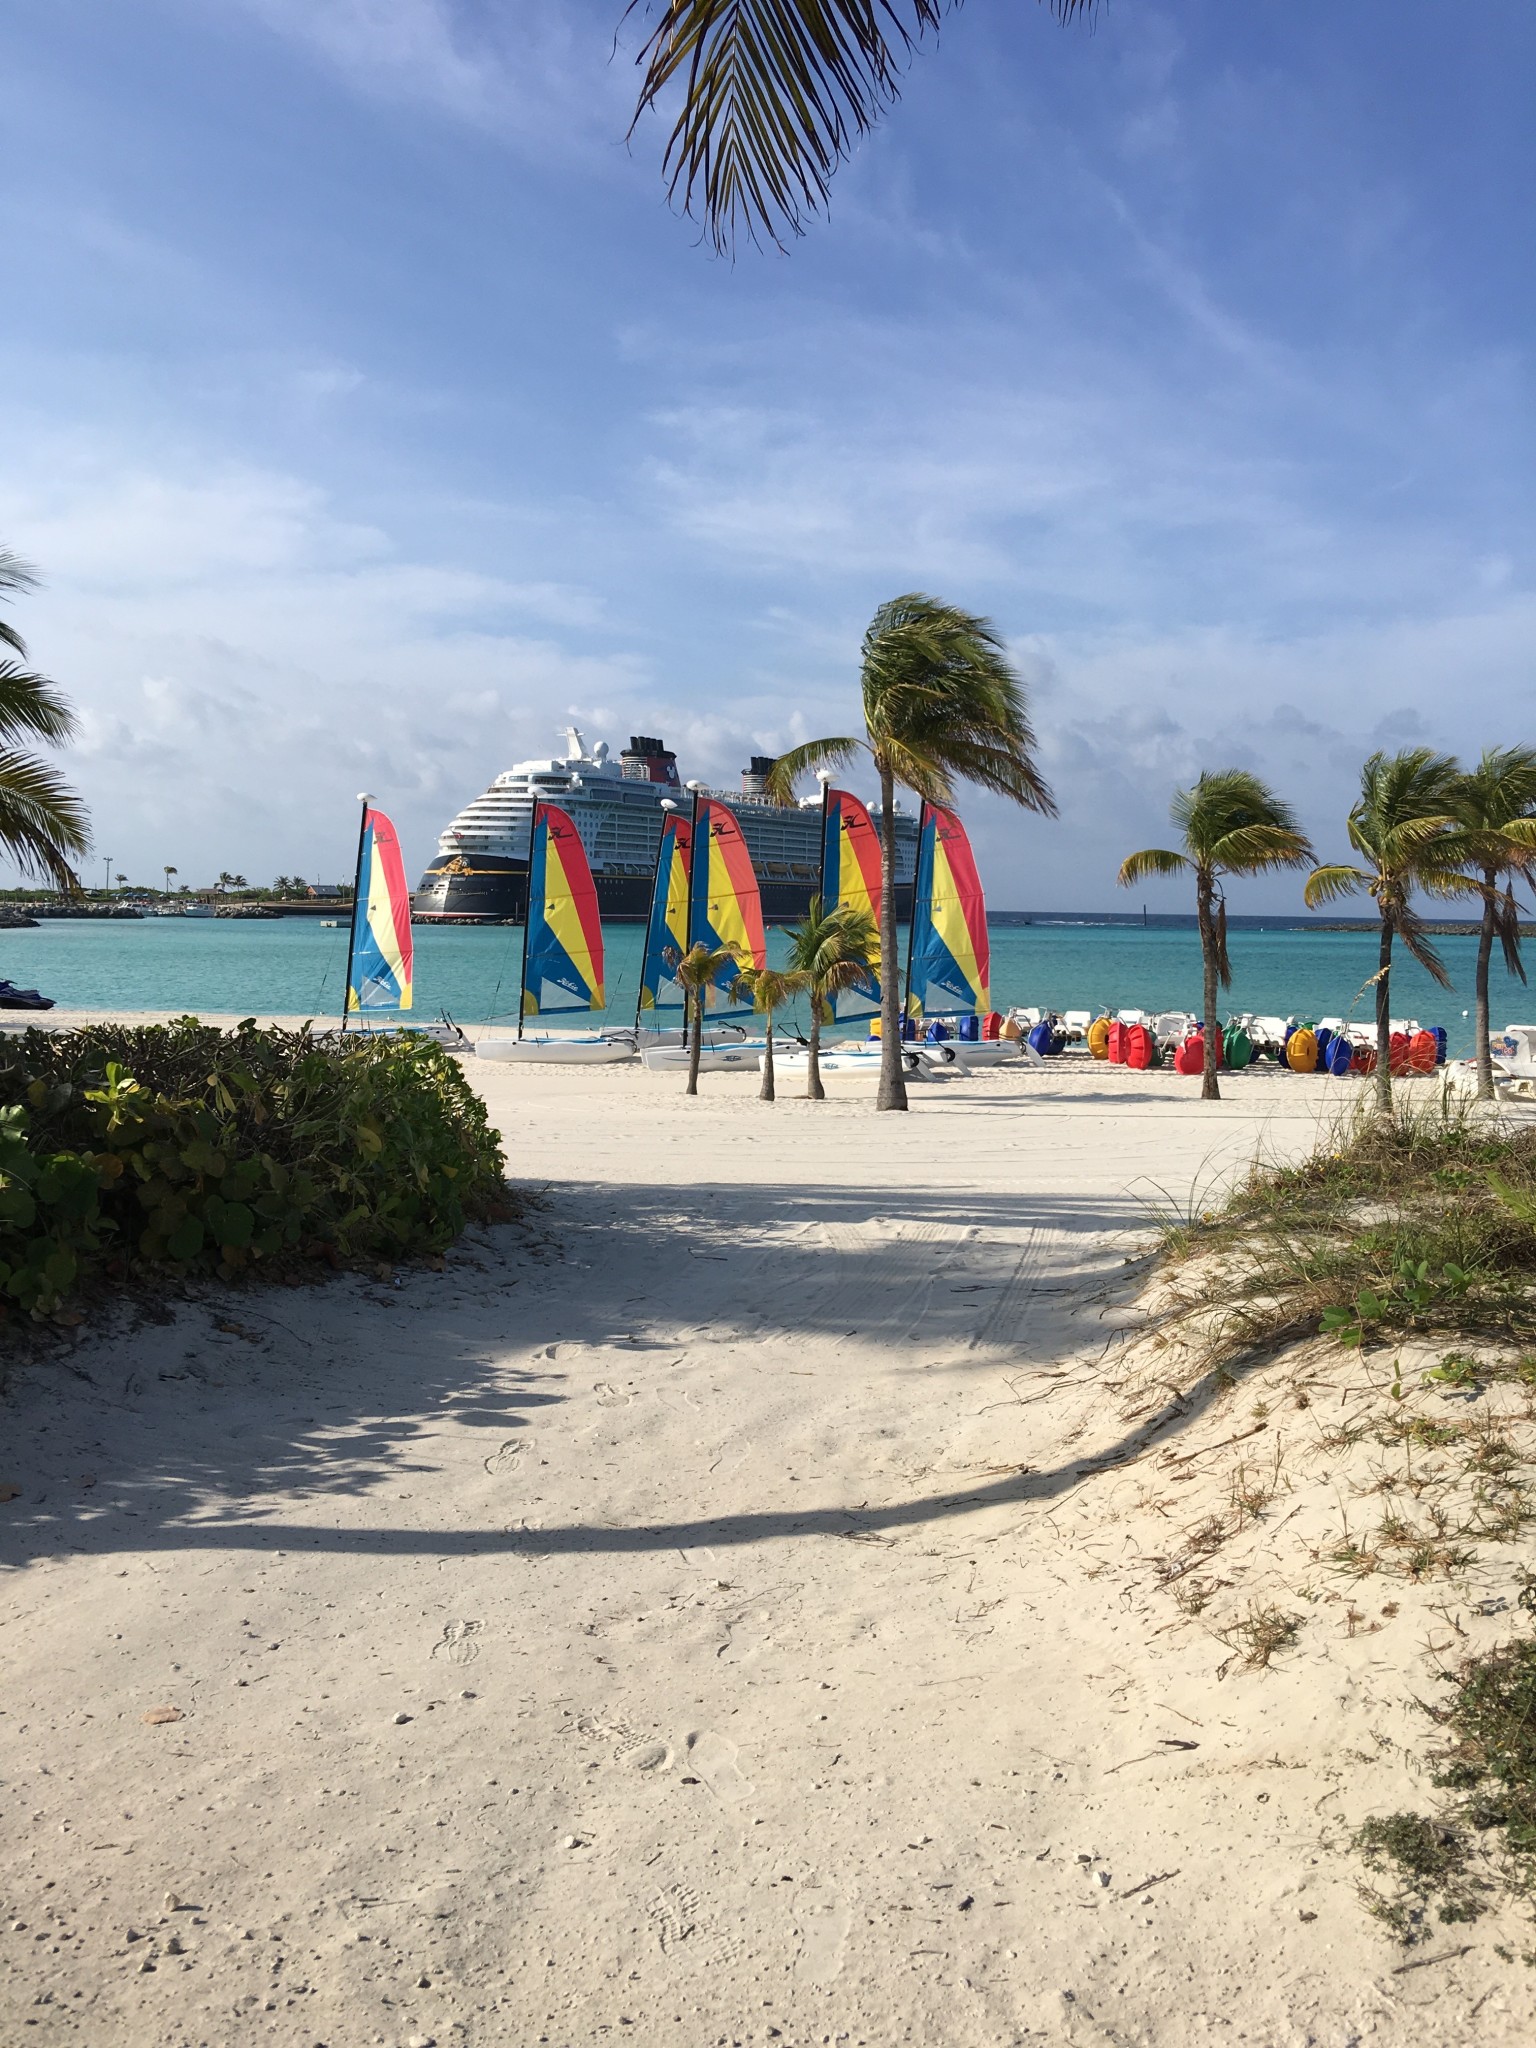 Castaway Cay – Fun Things to Do on Disney’s Private Island in the Bahamas